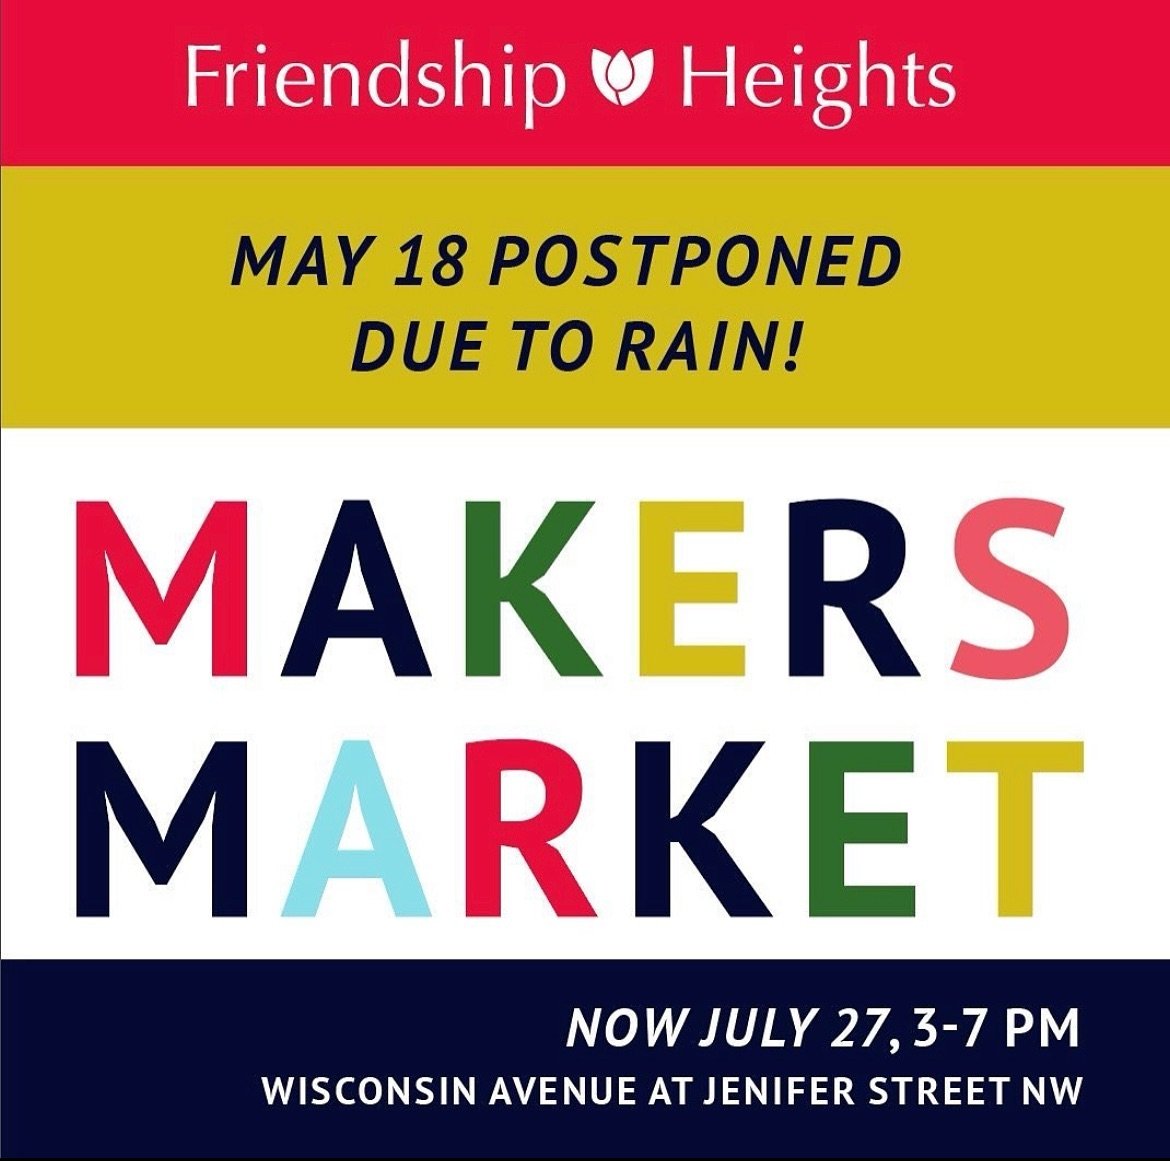 The Makers Market has been postponed due to rain, but we hope to see you there July 27th!